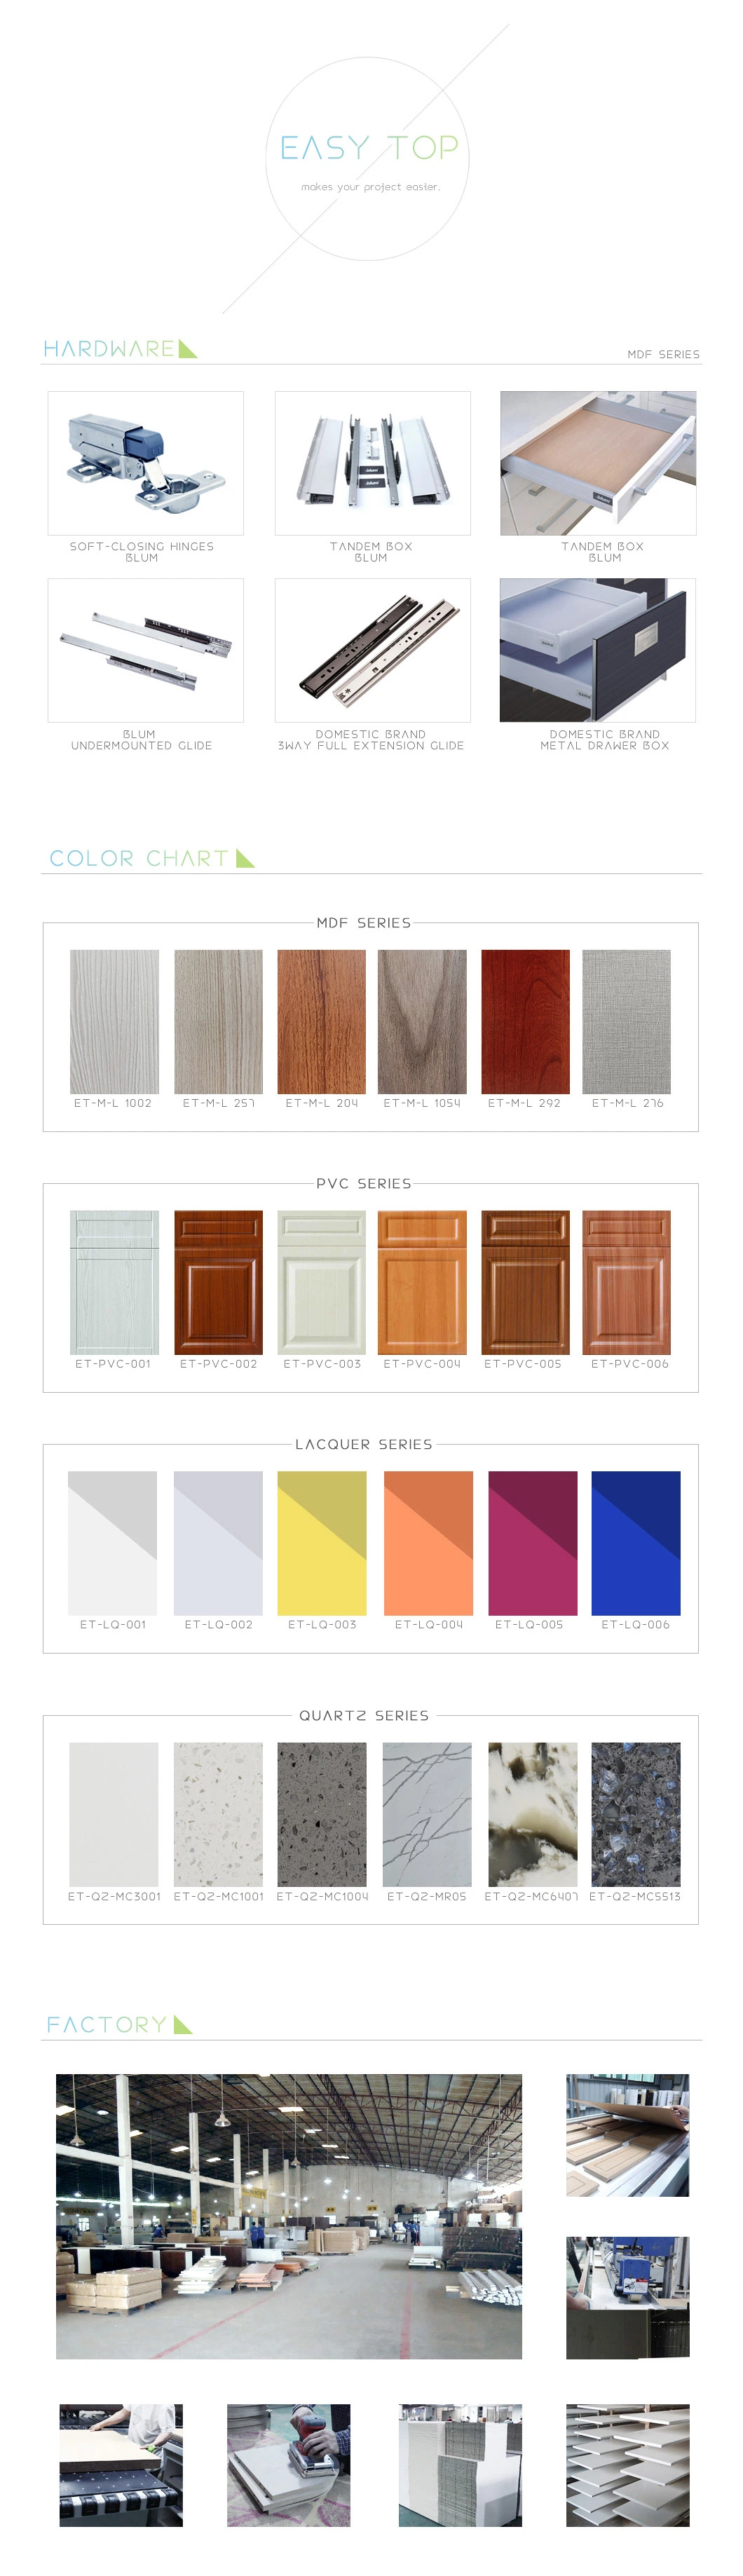 Economical and Practical Wooden Tones Built in Closet Cabinets Wardrobe Bedroom Furniture